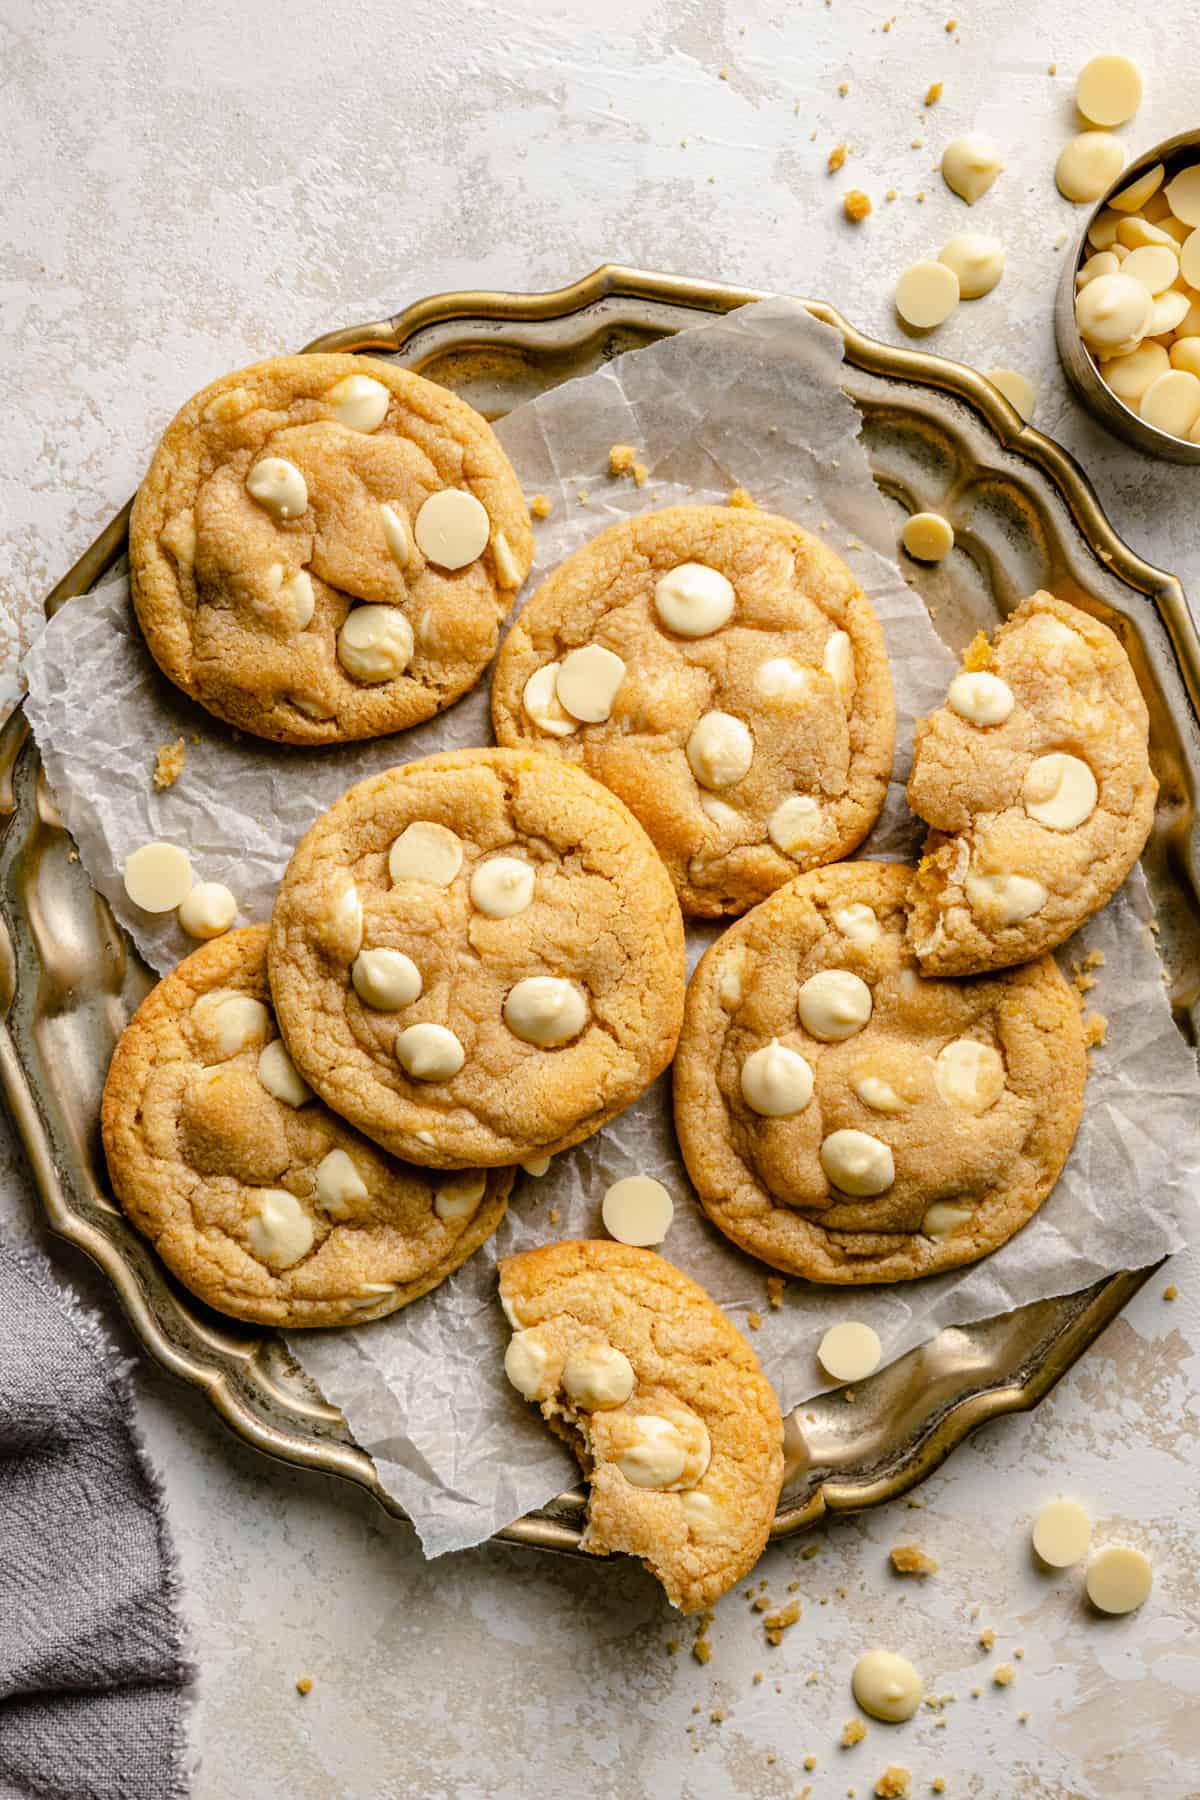 A golden platter lined with parchment with lemon white chocolate cookies on it.